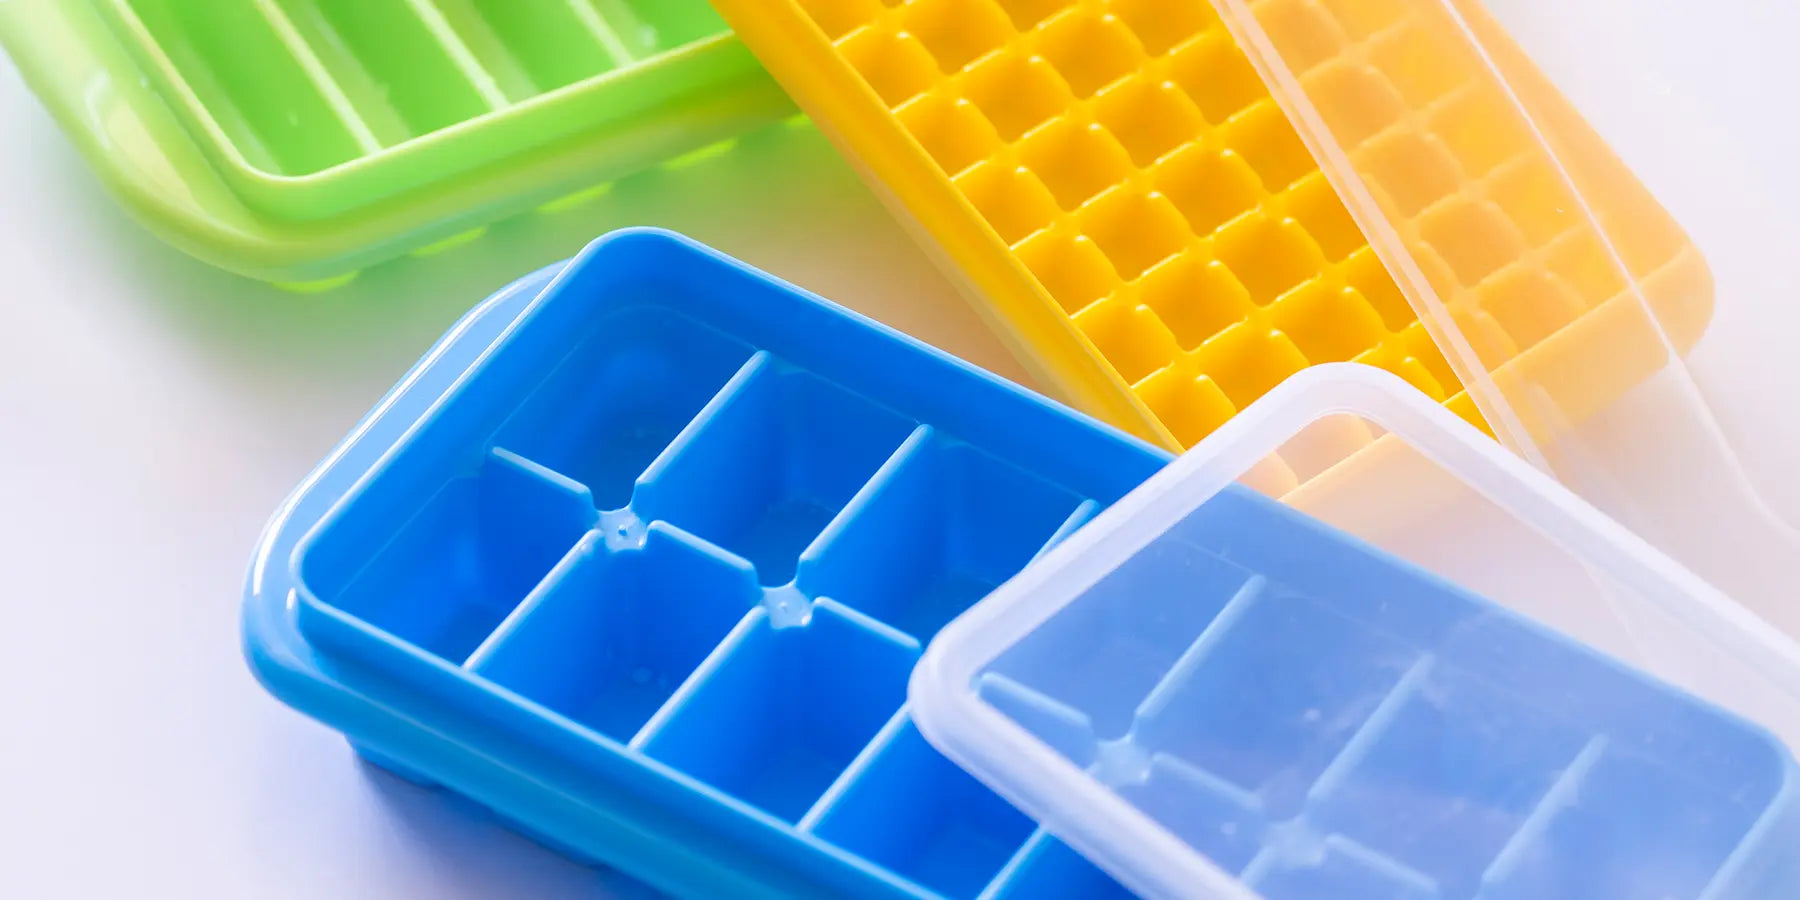 Discover our great selection of Ice Cube Trays at Globalkitchen Japan.